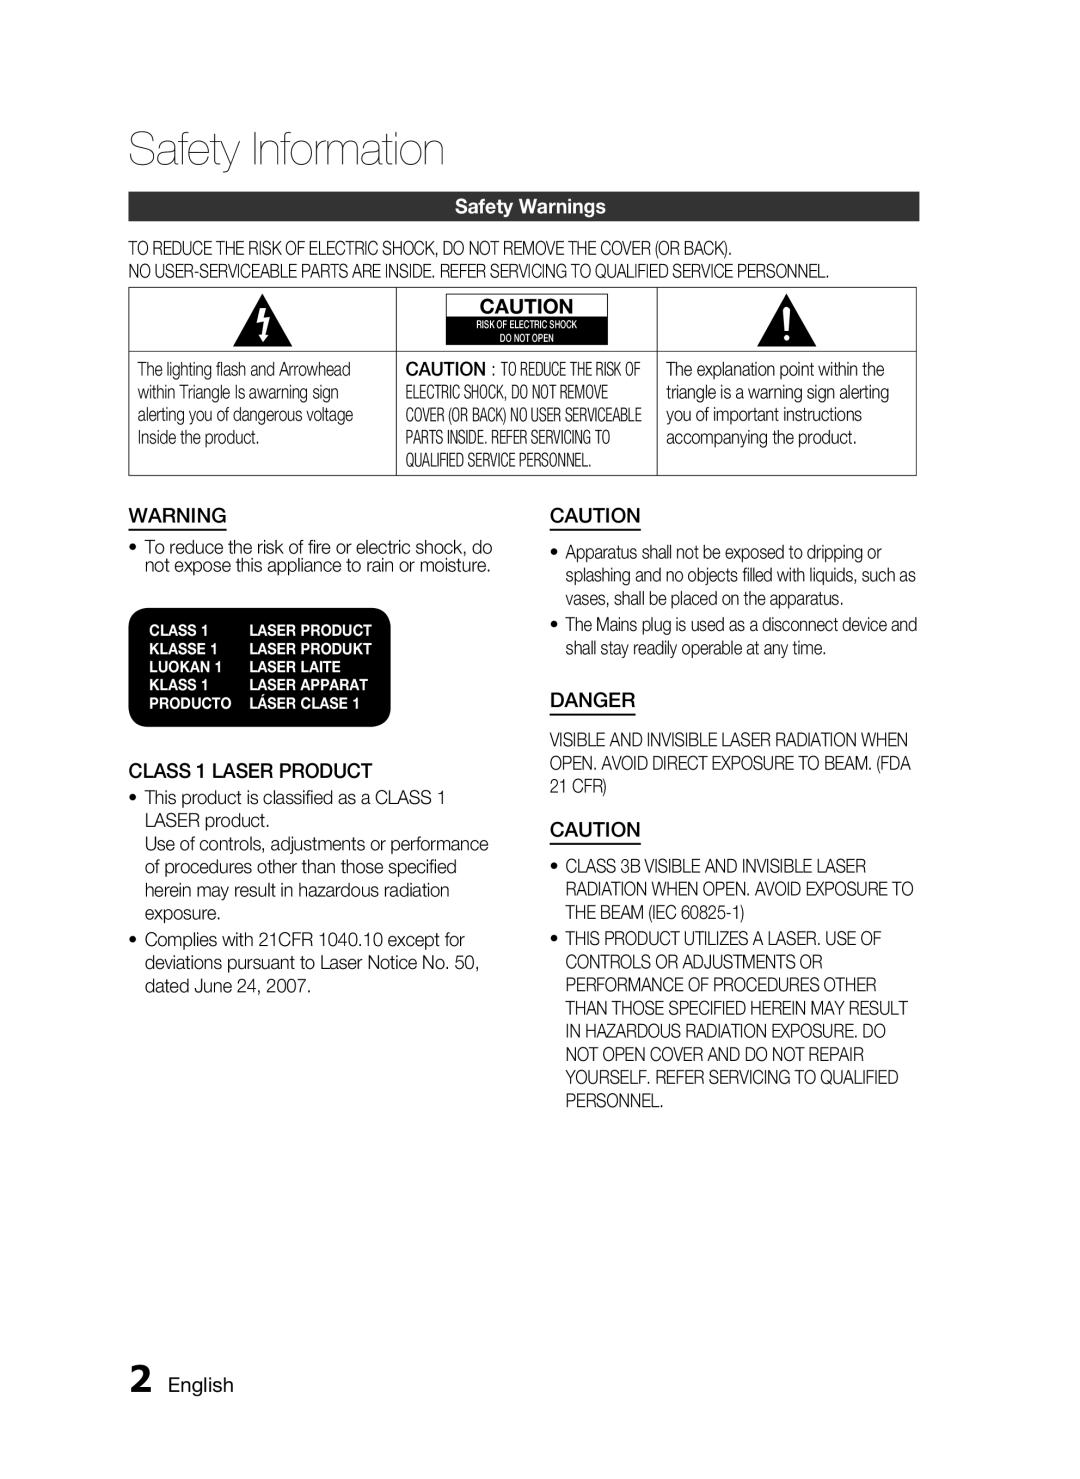 Samsung C6600 user manual Safety Information, Safety Warnings, CLASS 1 LASER PRODUCT, Danger, English 